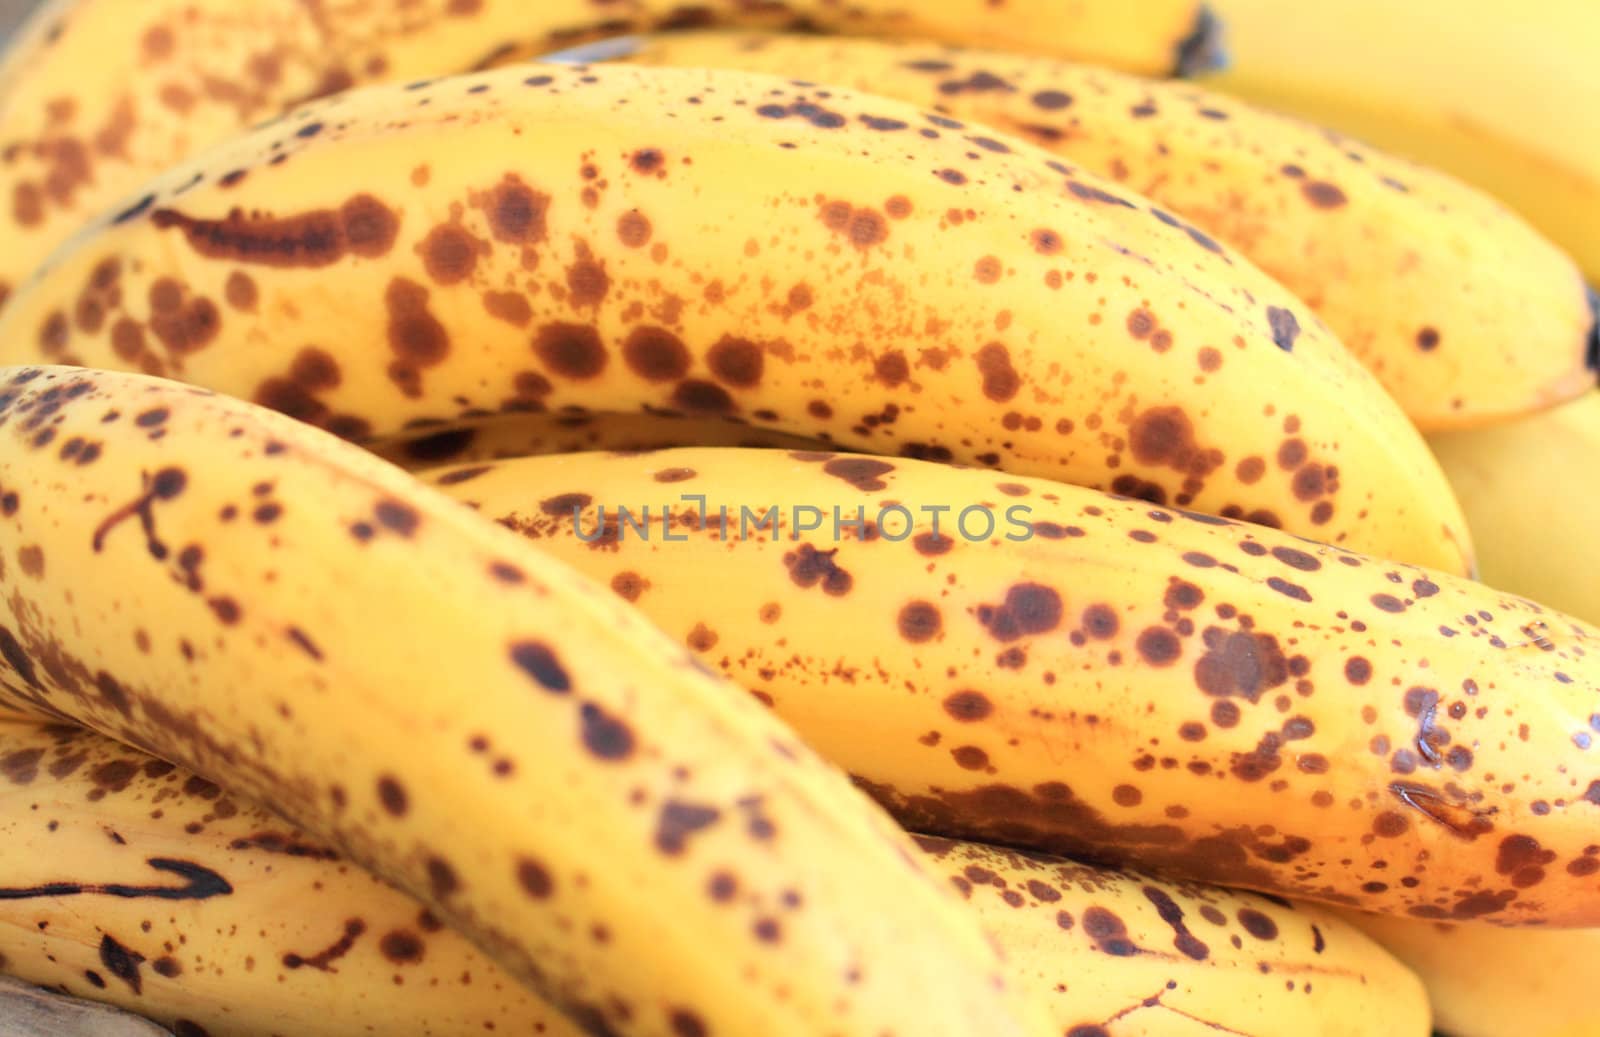 Close up of the bananas for background